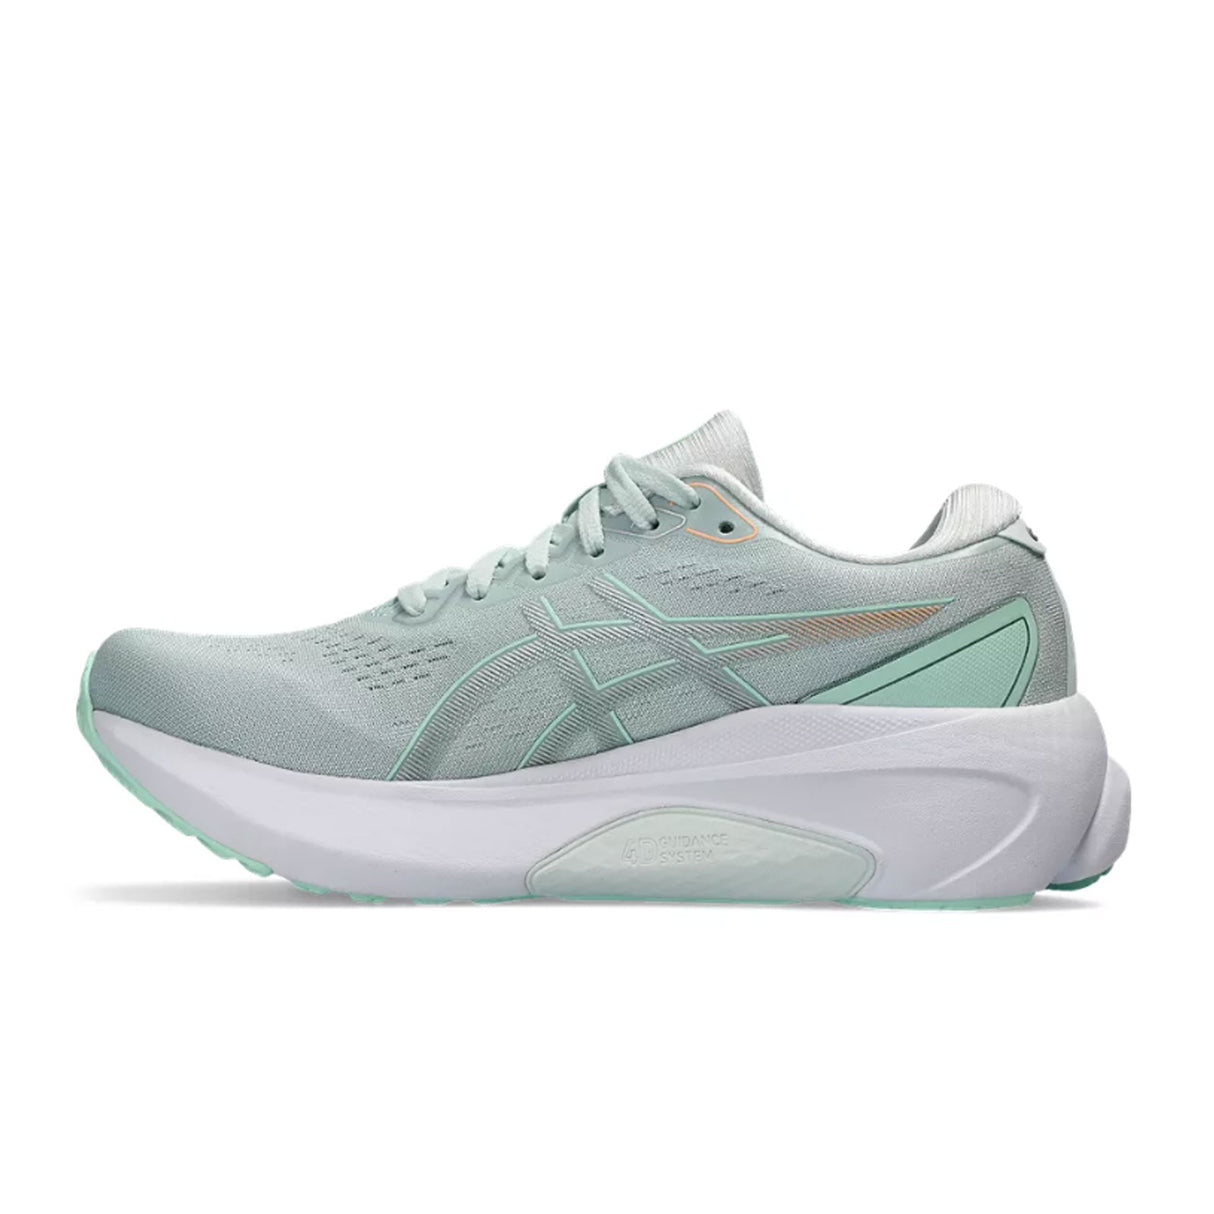 Asics Gel-Kayano 30 Running Shoe (Women) - Pale Mint/Mint Tint Athletic - Running - Stability - The Heel Shoe Fitters